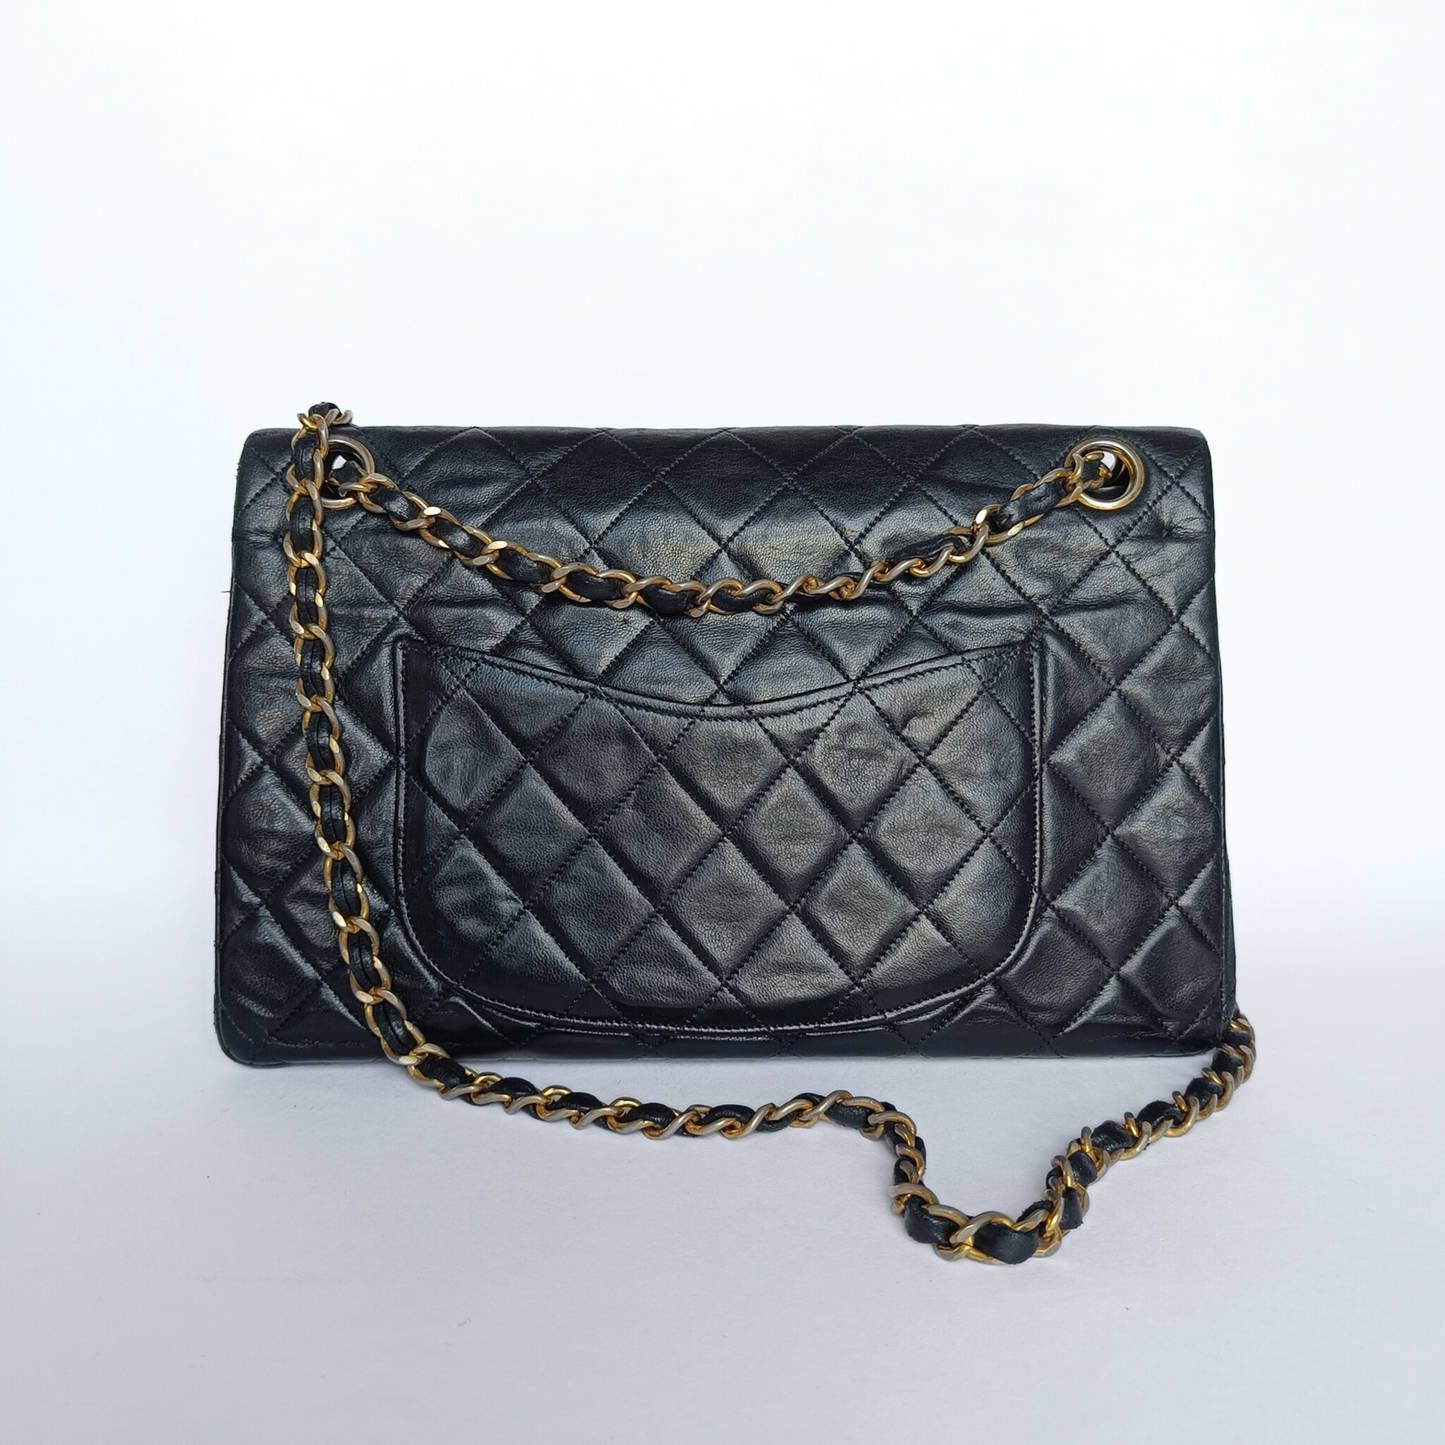 Chanel Silver Lambskin Jumbo 2.55 Quilted Classic Flap Bag